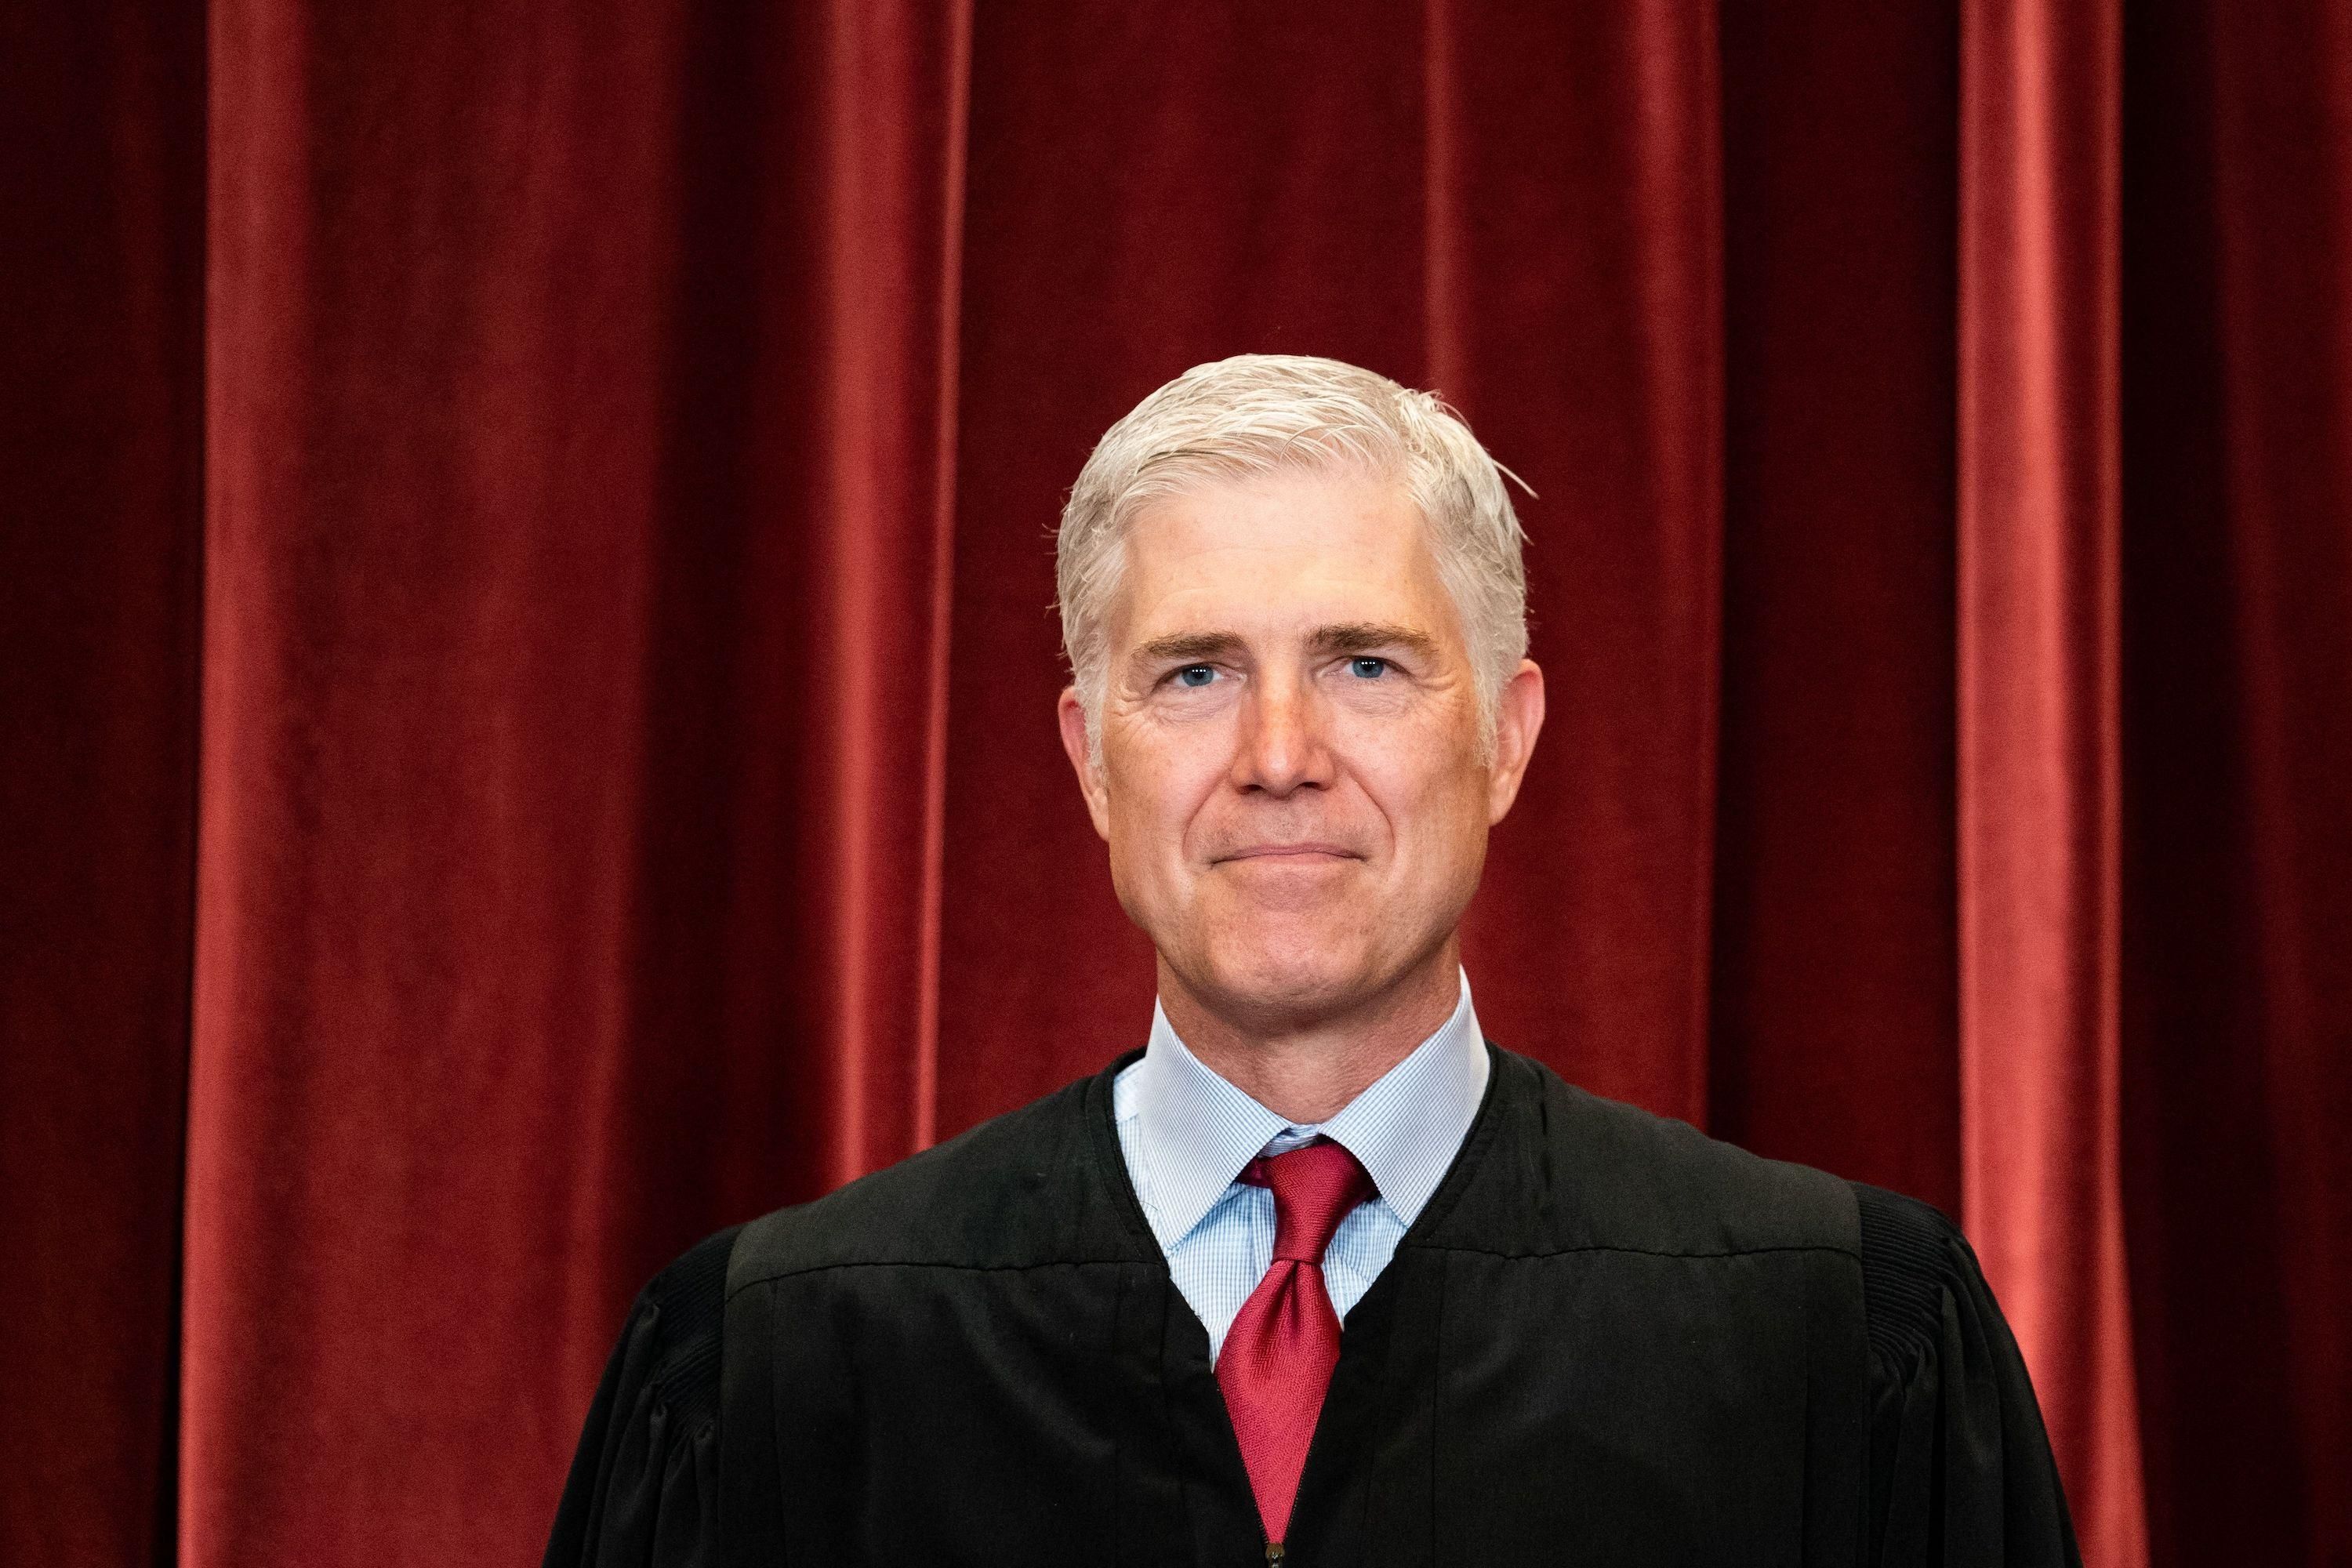 Associate Justice Neil Gorsuch stands during a group photo of the Justices at the Supreme Court in Washington, D.C. on April 23, 2021.